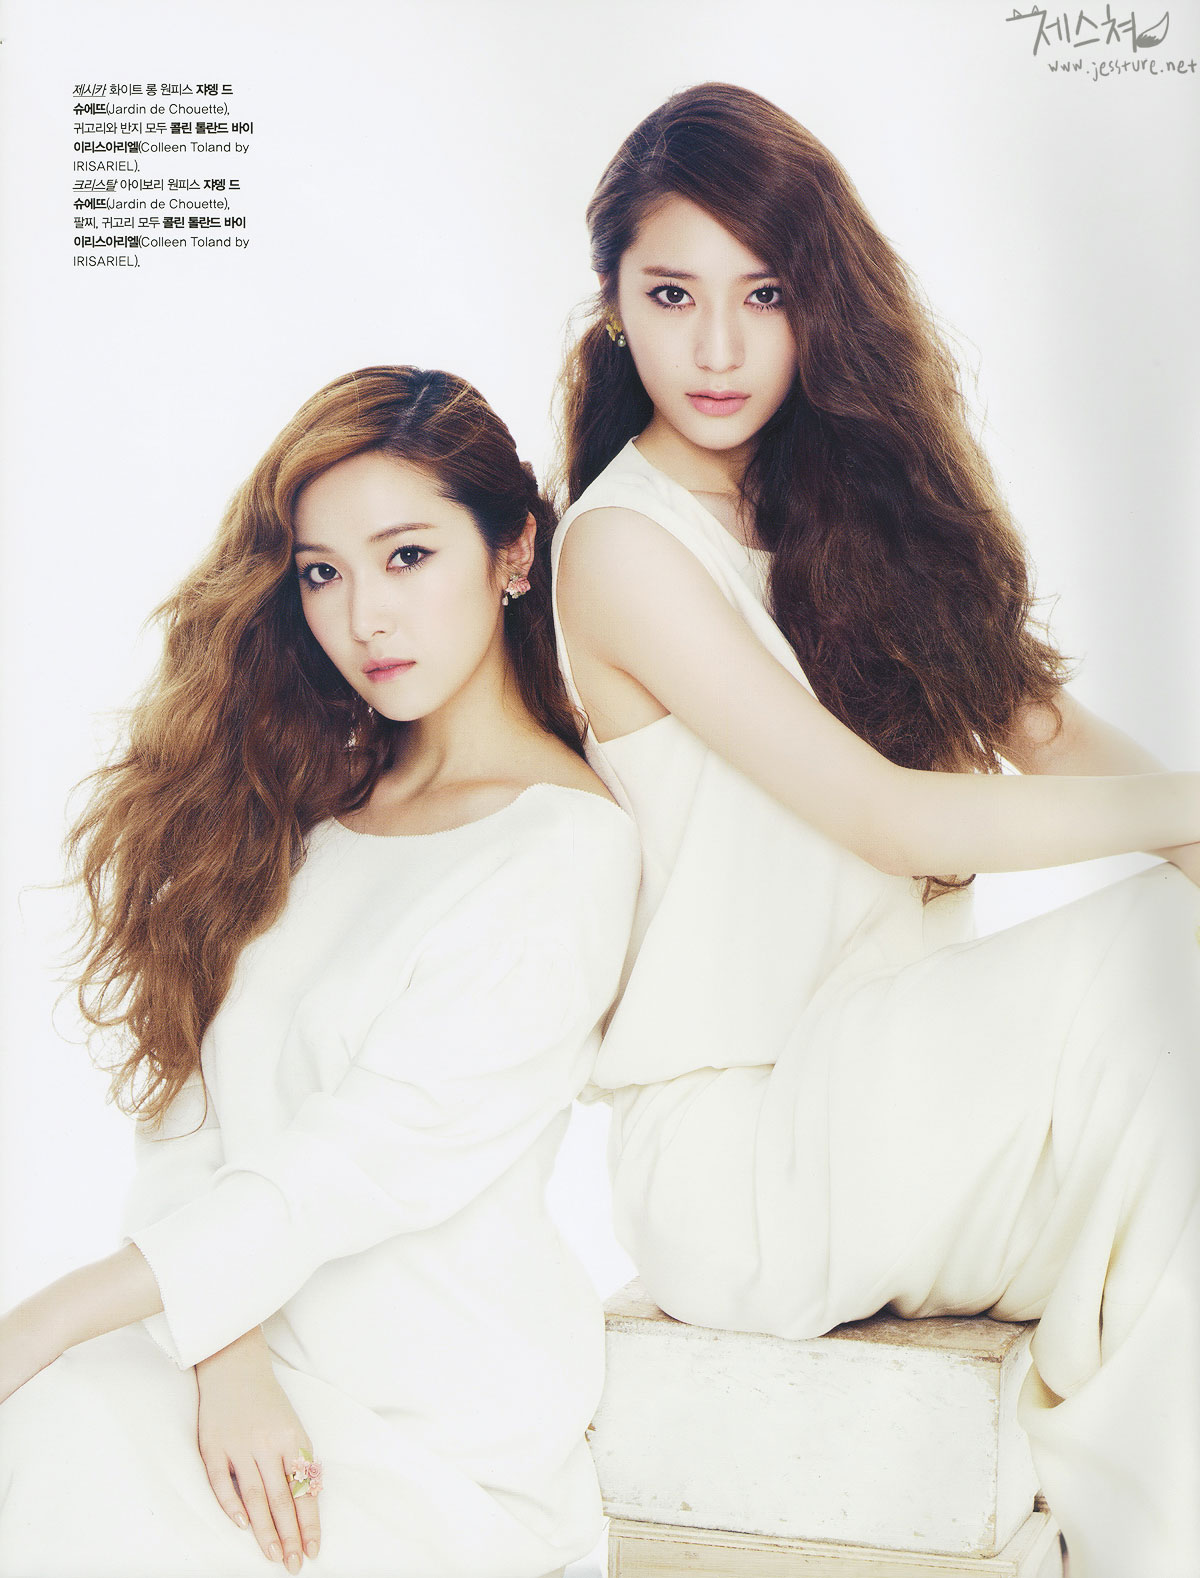 Kpop Jung sisters Marie Claire Magazine